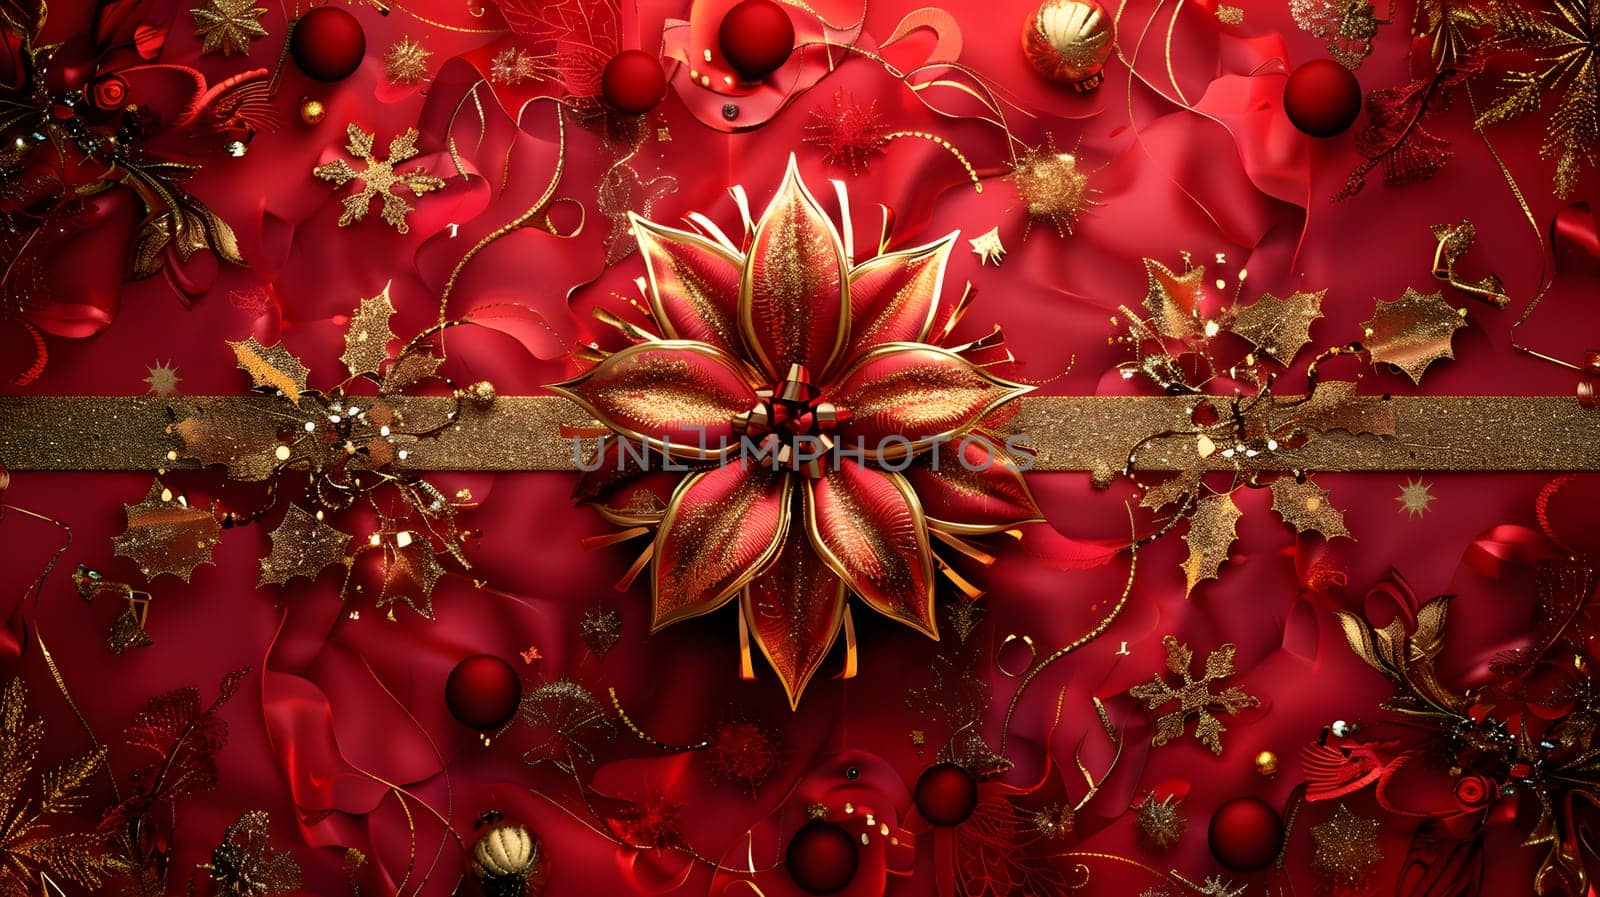 Red and gold background with poinsettia flower art by Nadtochiy